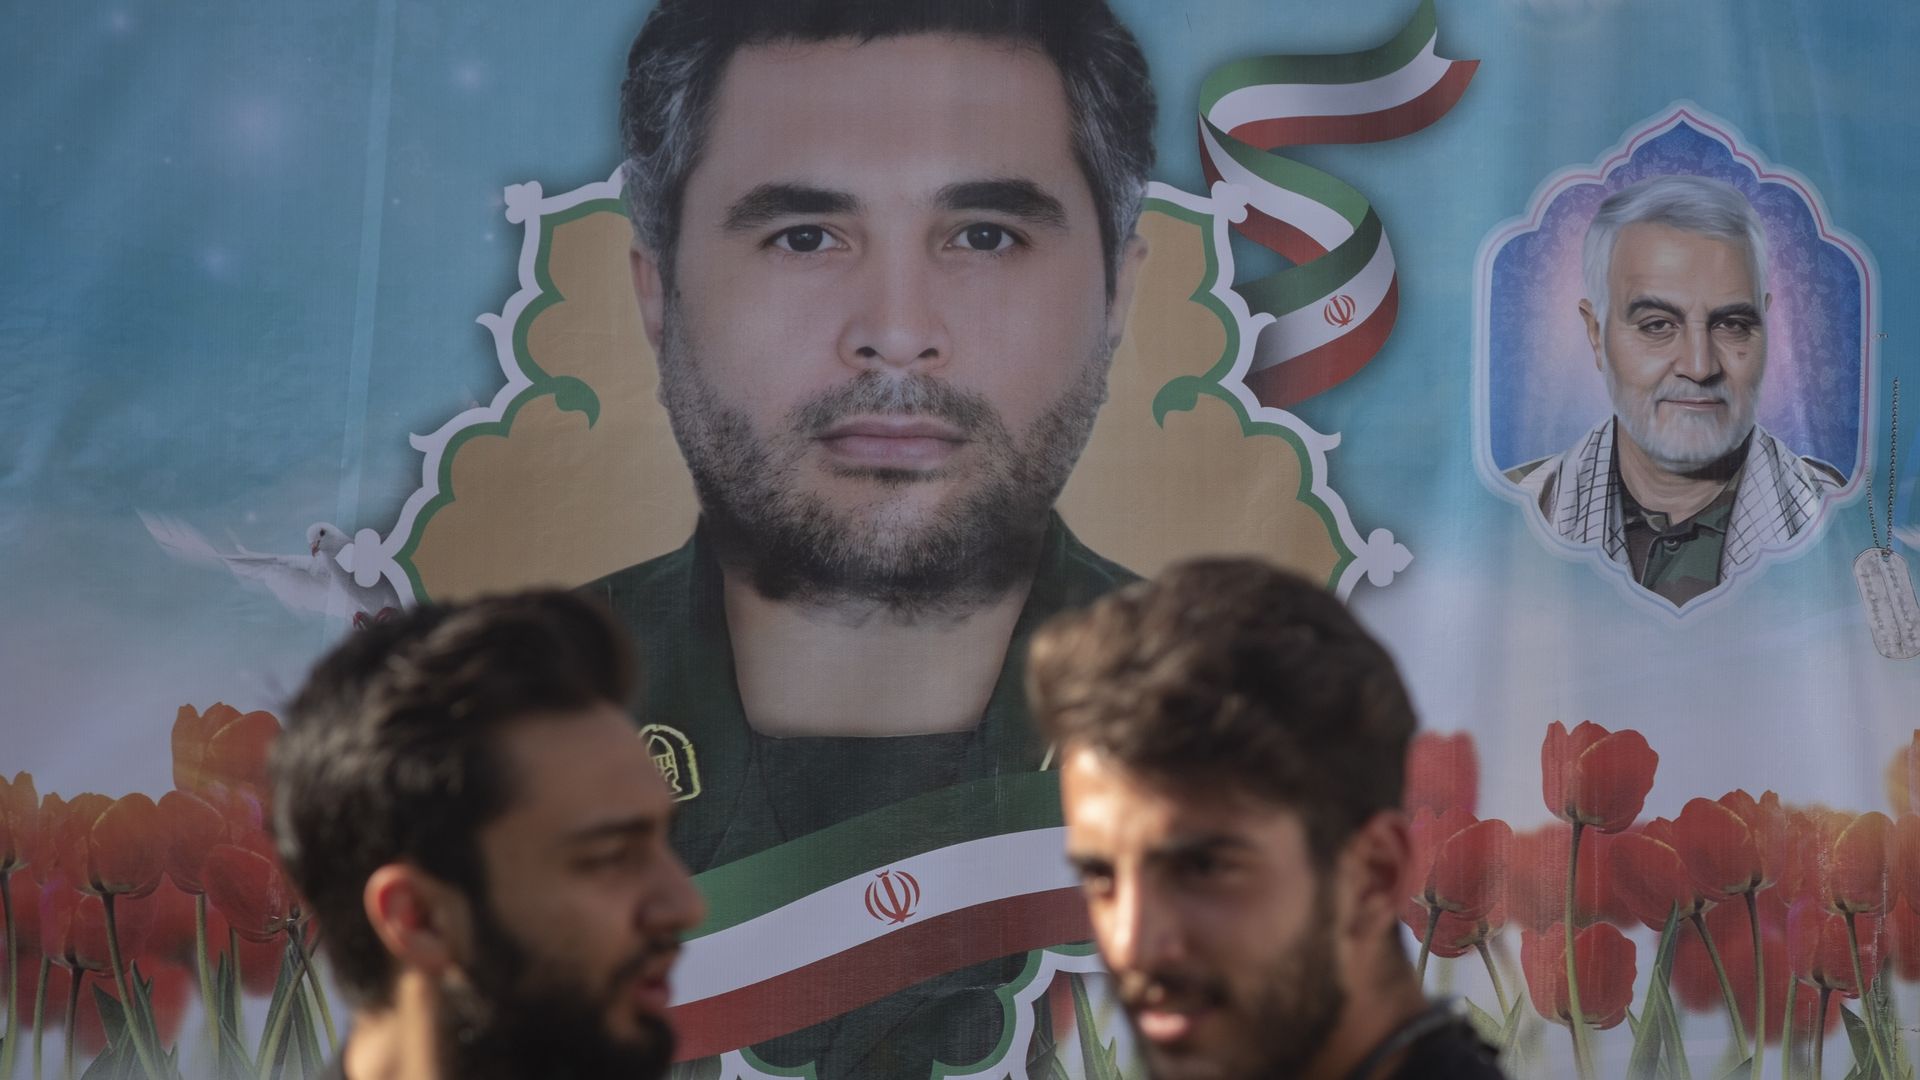 stand under a portraits of the assassinated Islamic Revolutionary Guard Corps Commander, Colonel Sayyad Khodai, and the former Commander of IRGCs Quds Force, General Qasem Soleimani during a rall